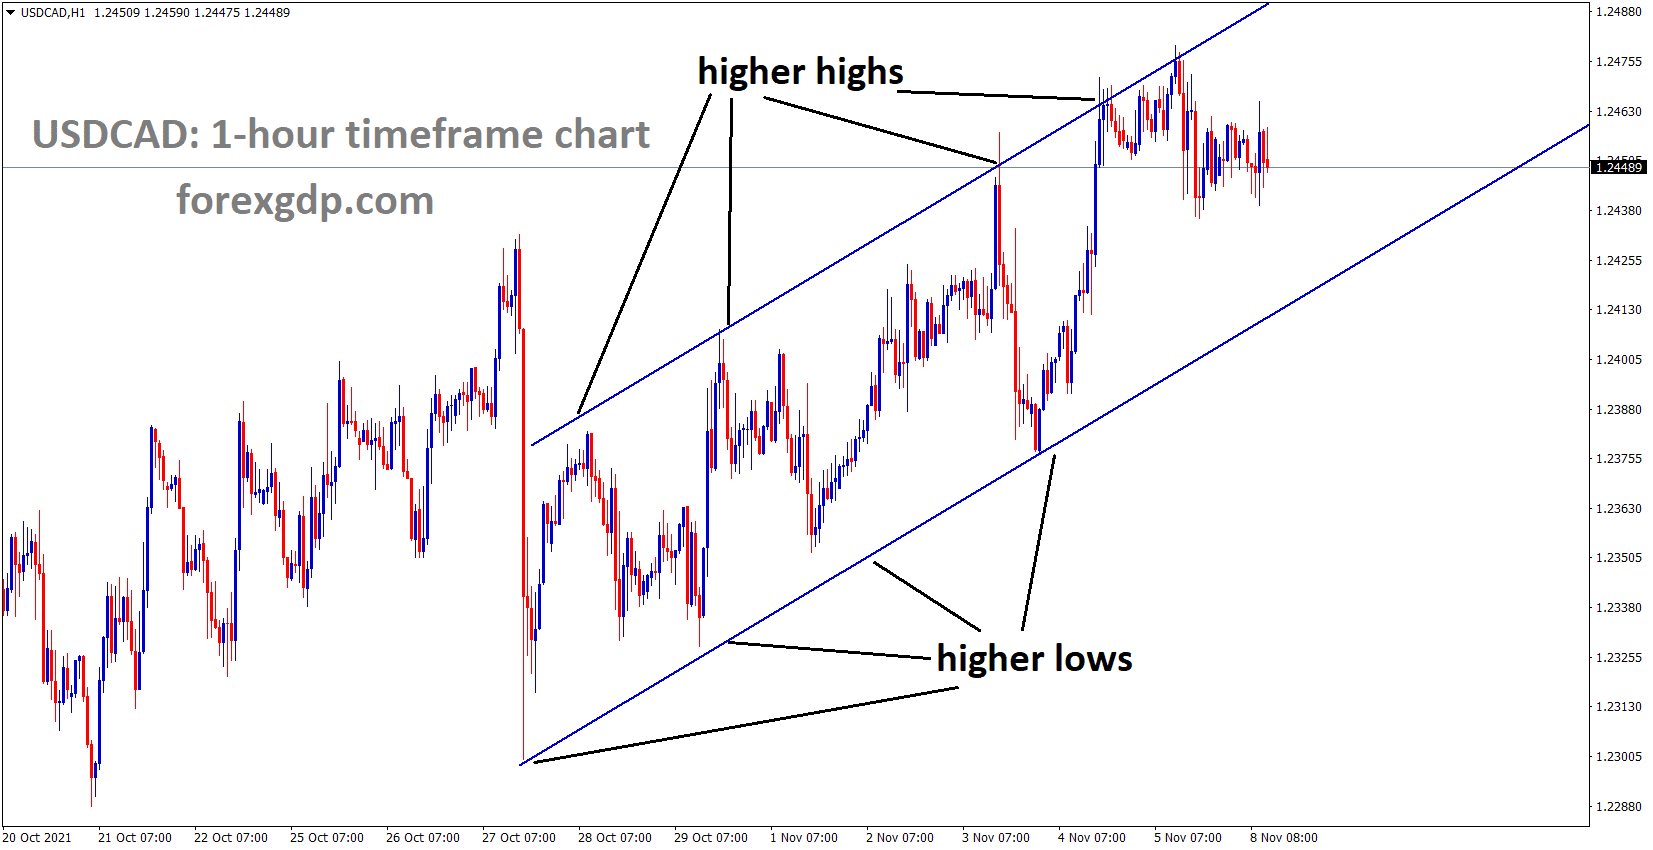 USDCAD is moving in an Ascending channel and falls down from a higher high